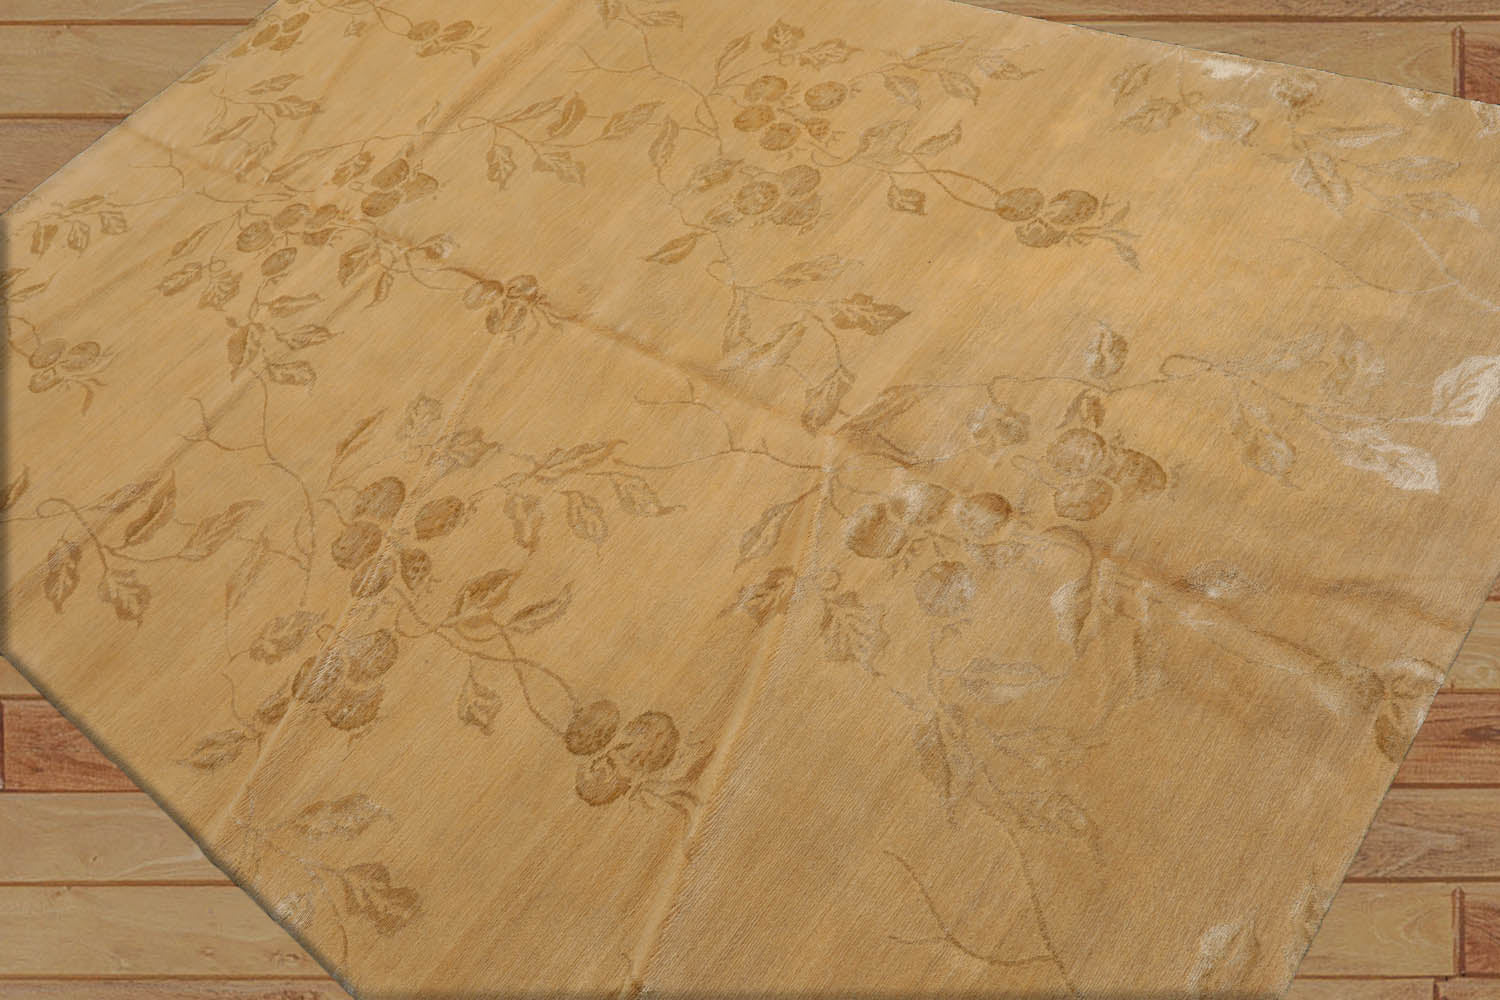 Desantiago 6x9 Hand Knotted Tibetan Wool and Silk Lapchi Traditional Oriental Area Rug Tone on Tone Caramel Color